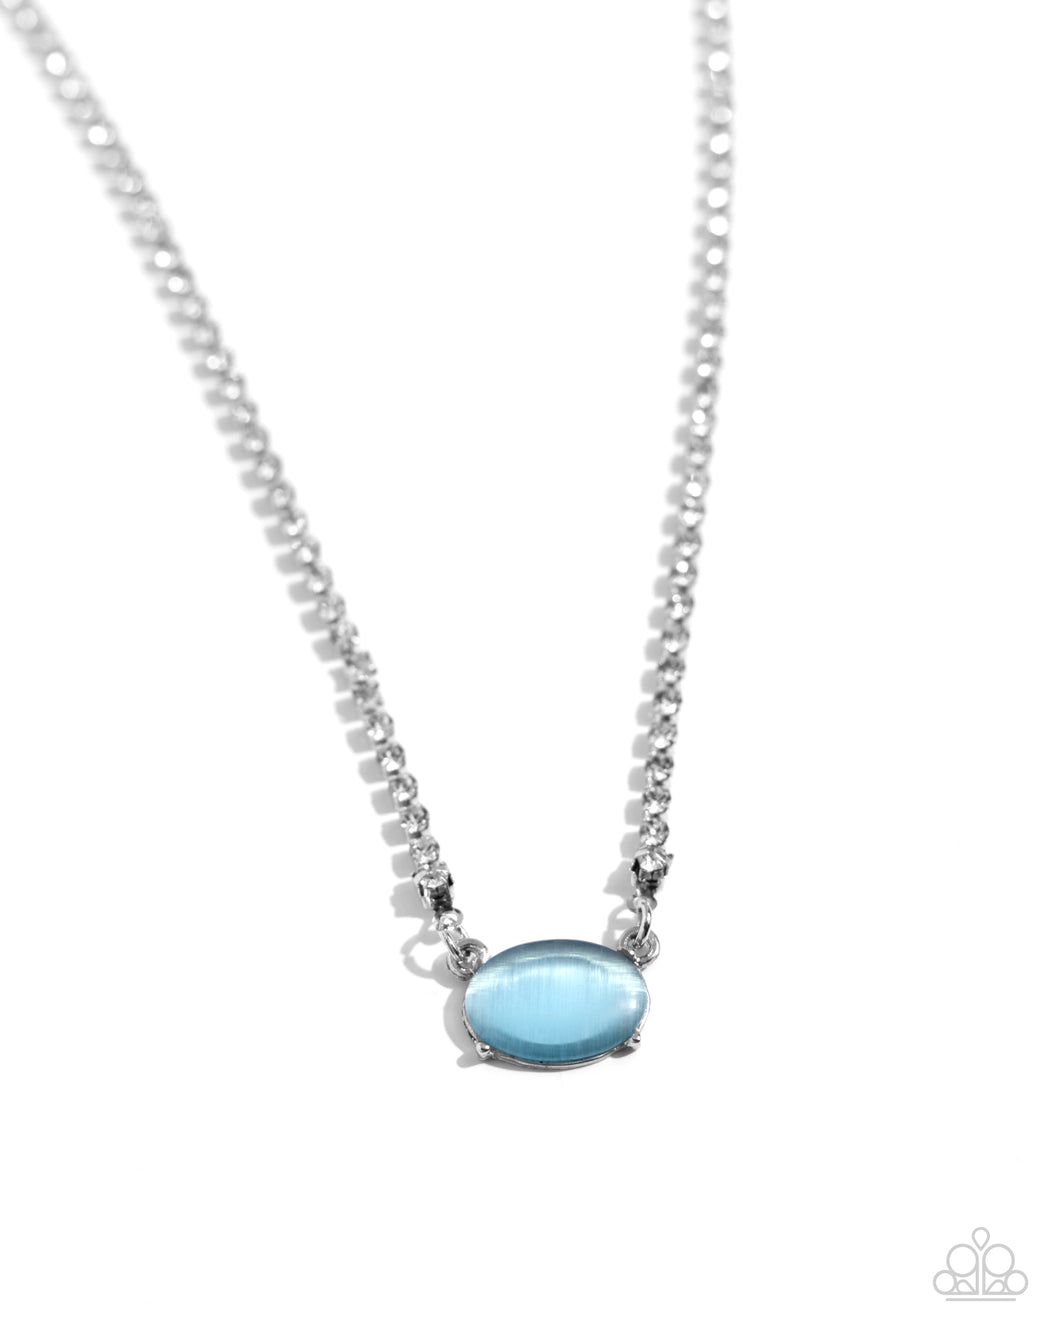 Dynamic Delicacy - Blue (Cat's Eye Bead) Necklace